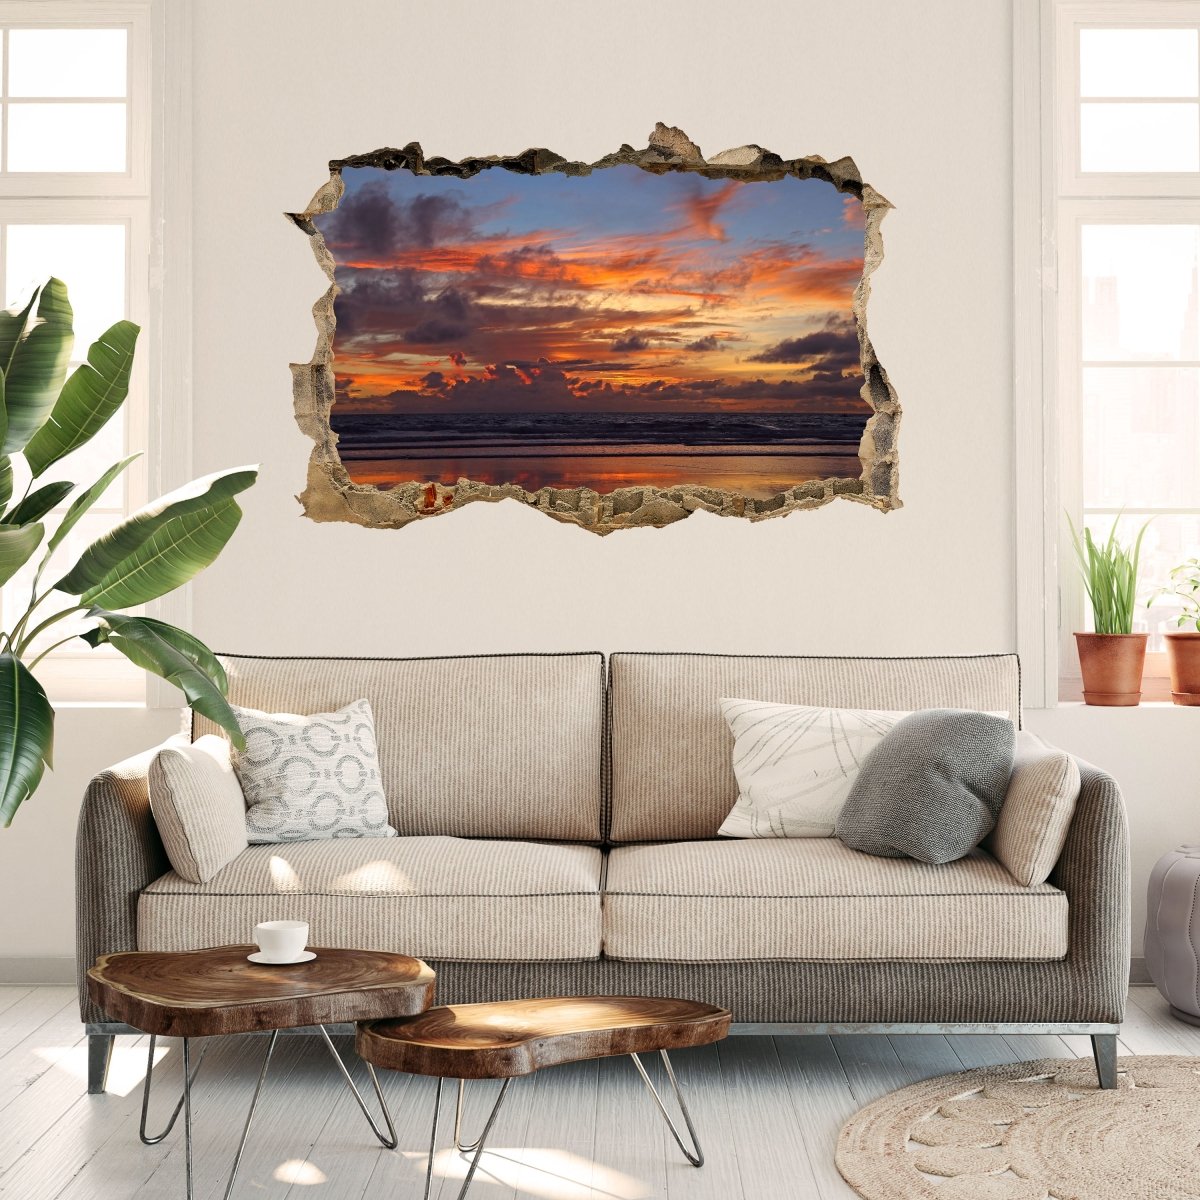 3D wall sticker sunset on the beach in Bali - Wall Decal M0907